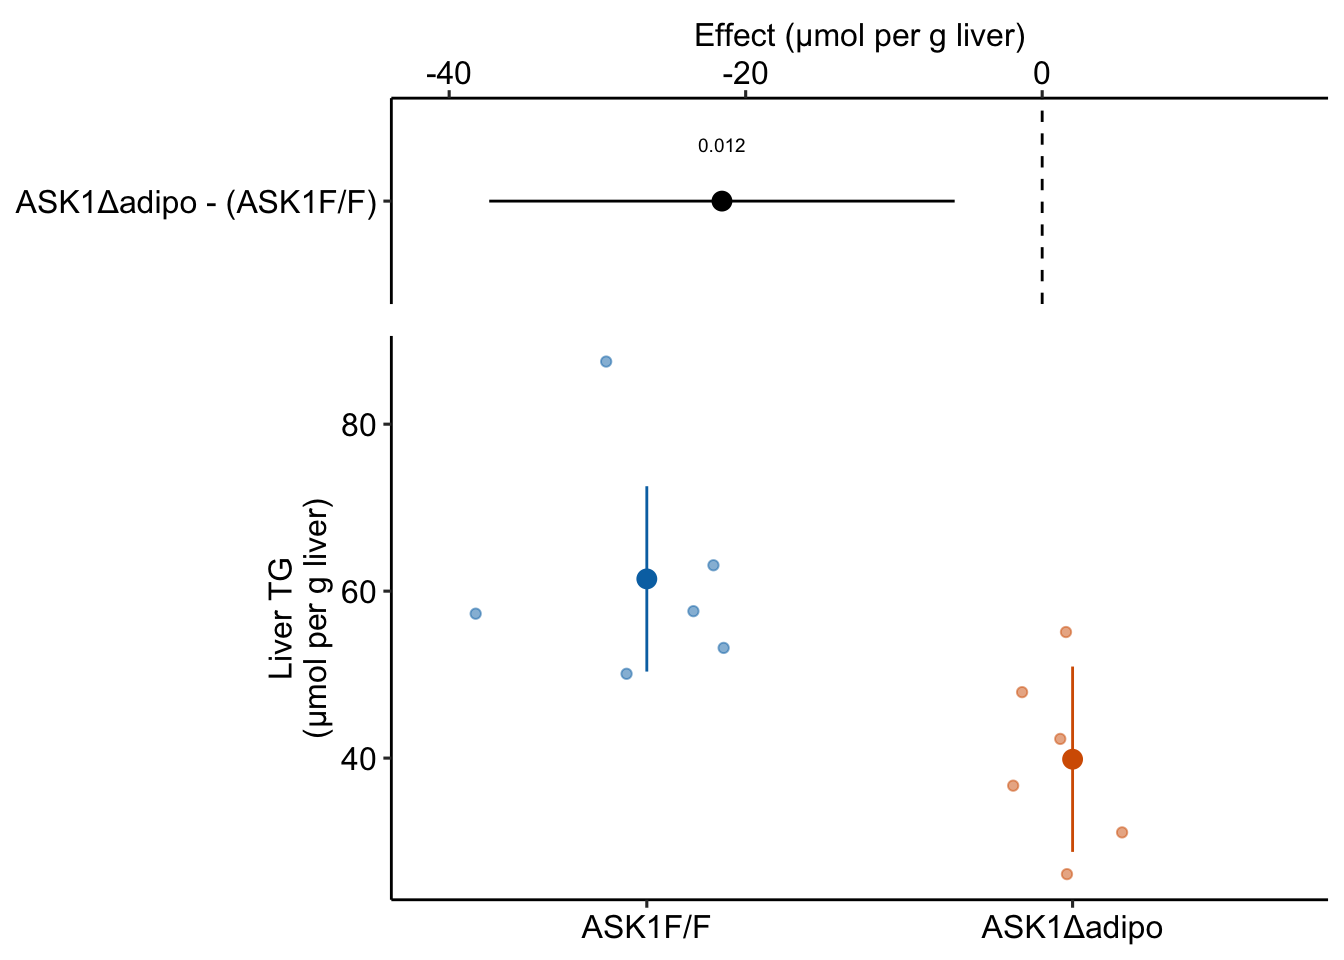 The effect of adipose-specific ASK1 knockout on liver triglyceride (TG).